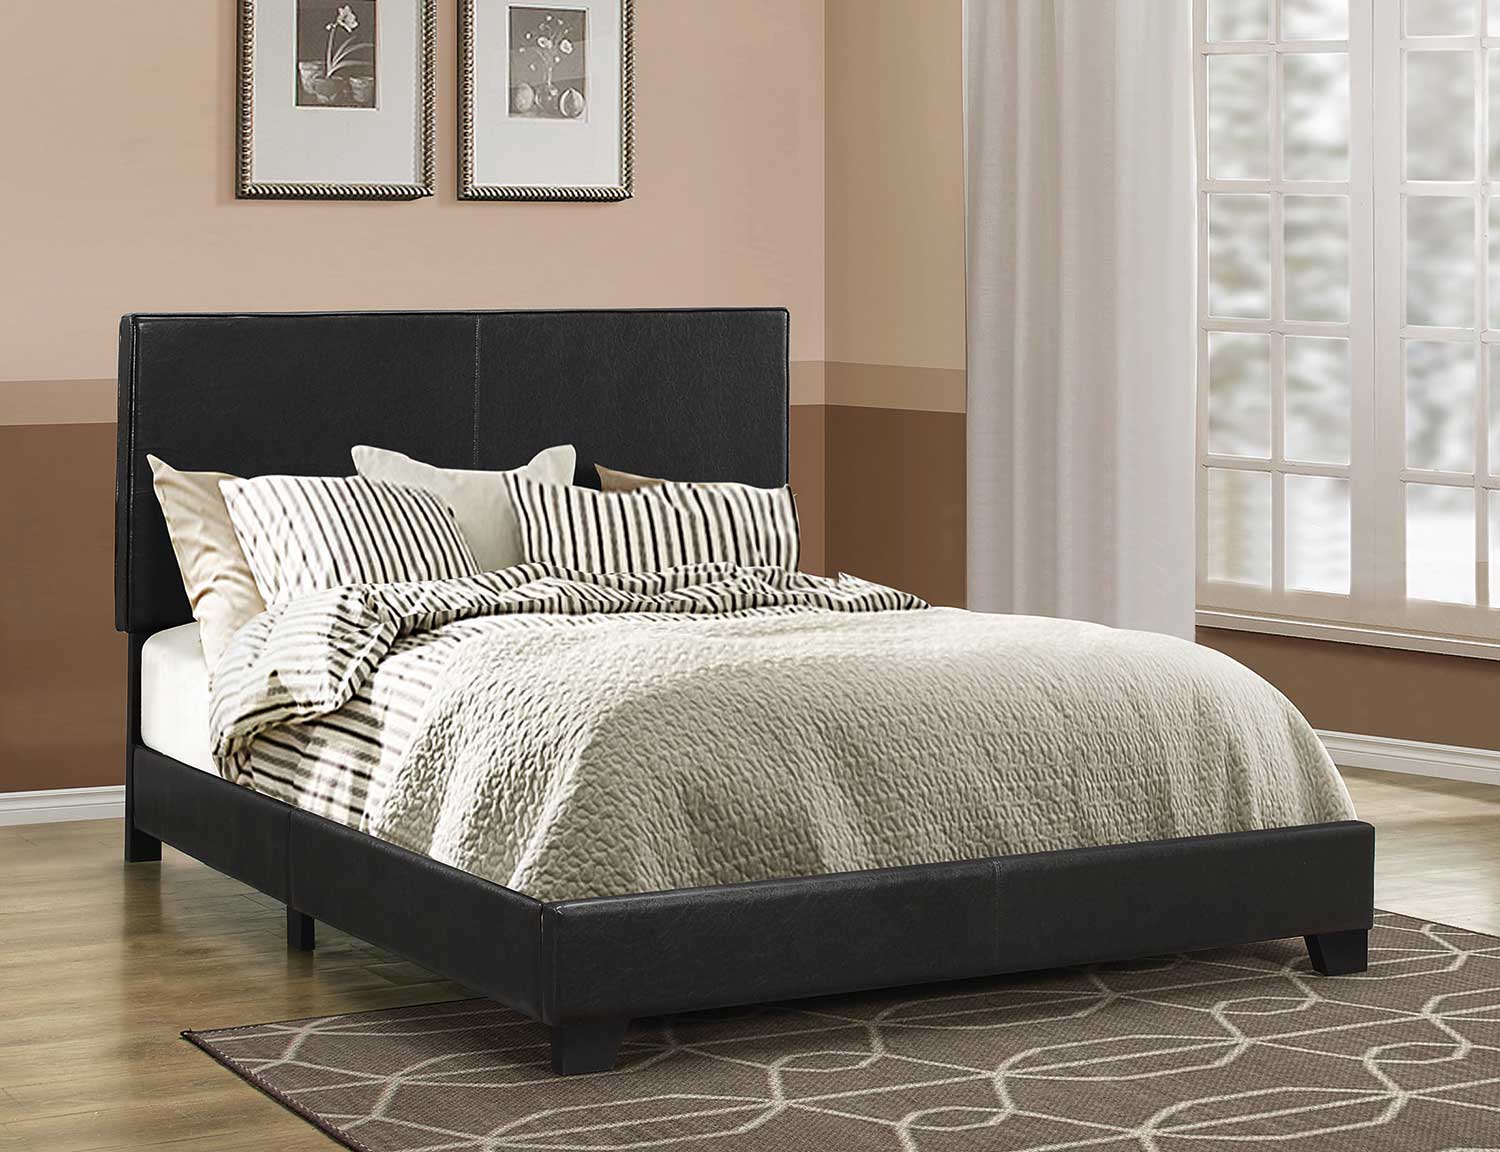 Coaster Dorian Low Profile Upholstered Bed - Brown Leatherette